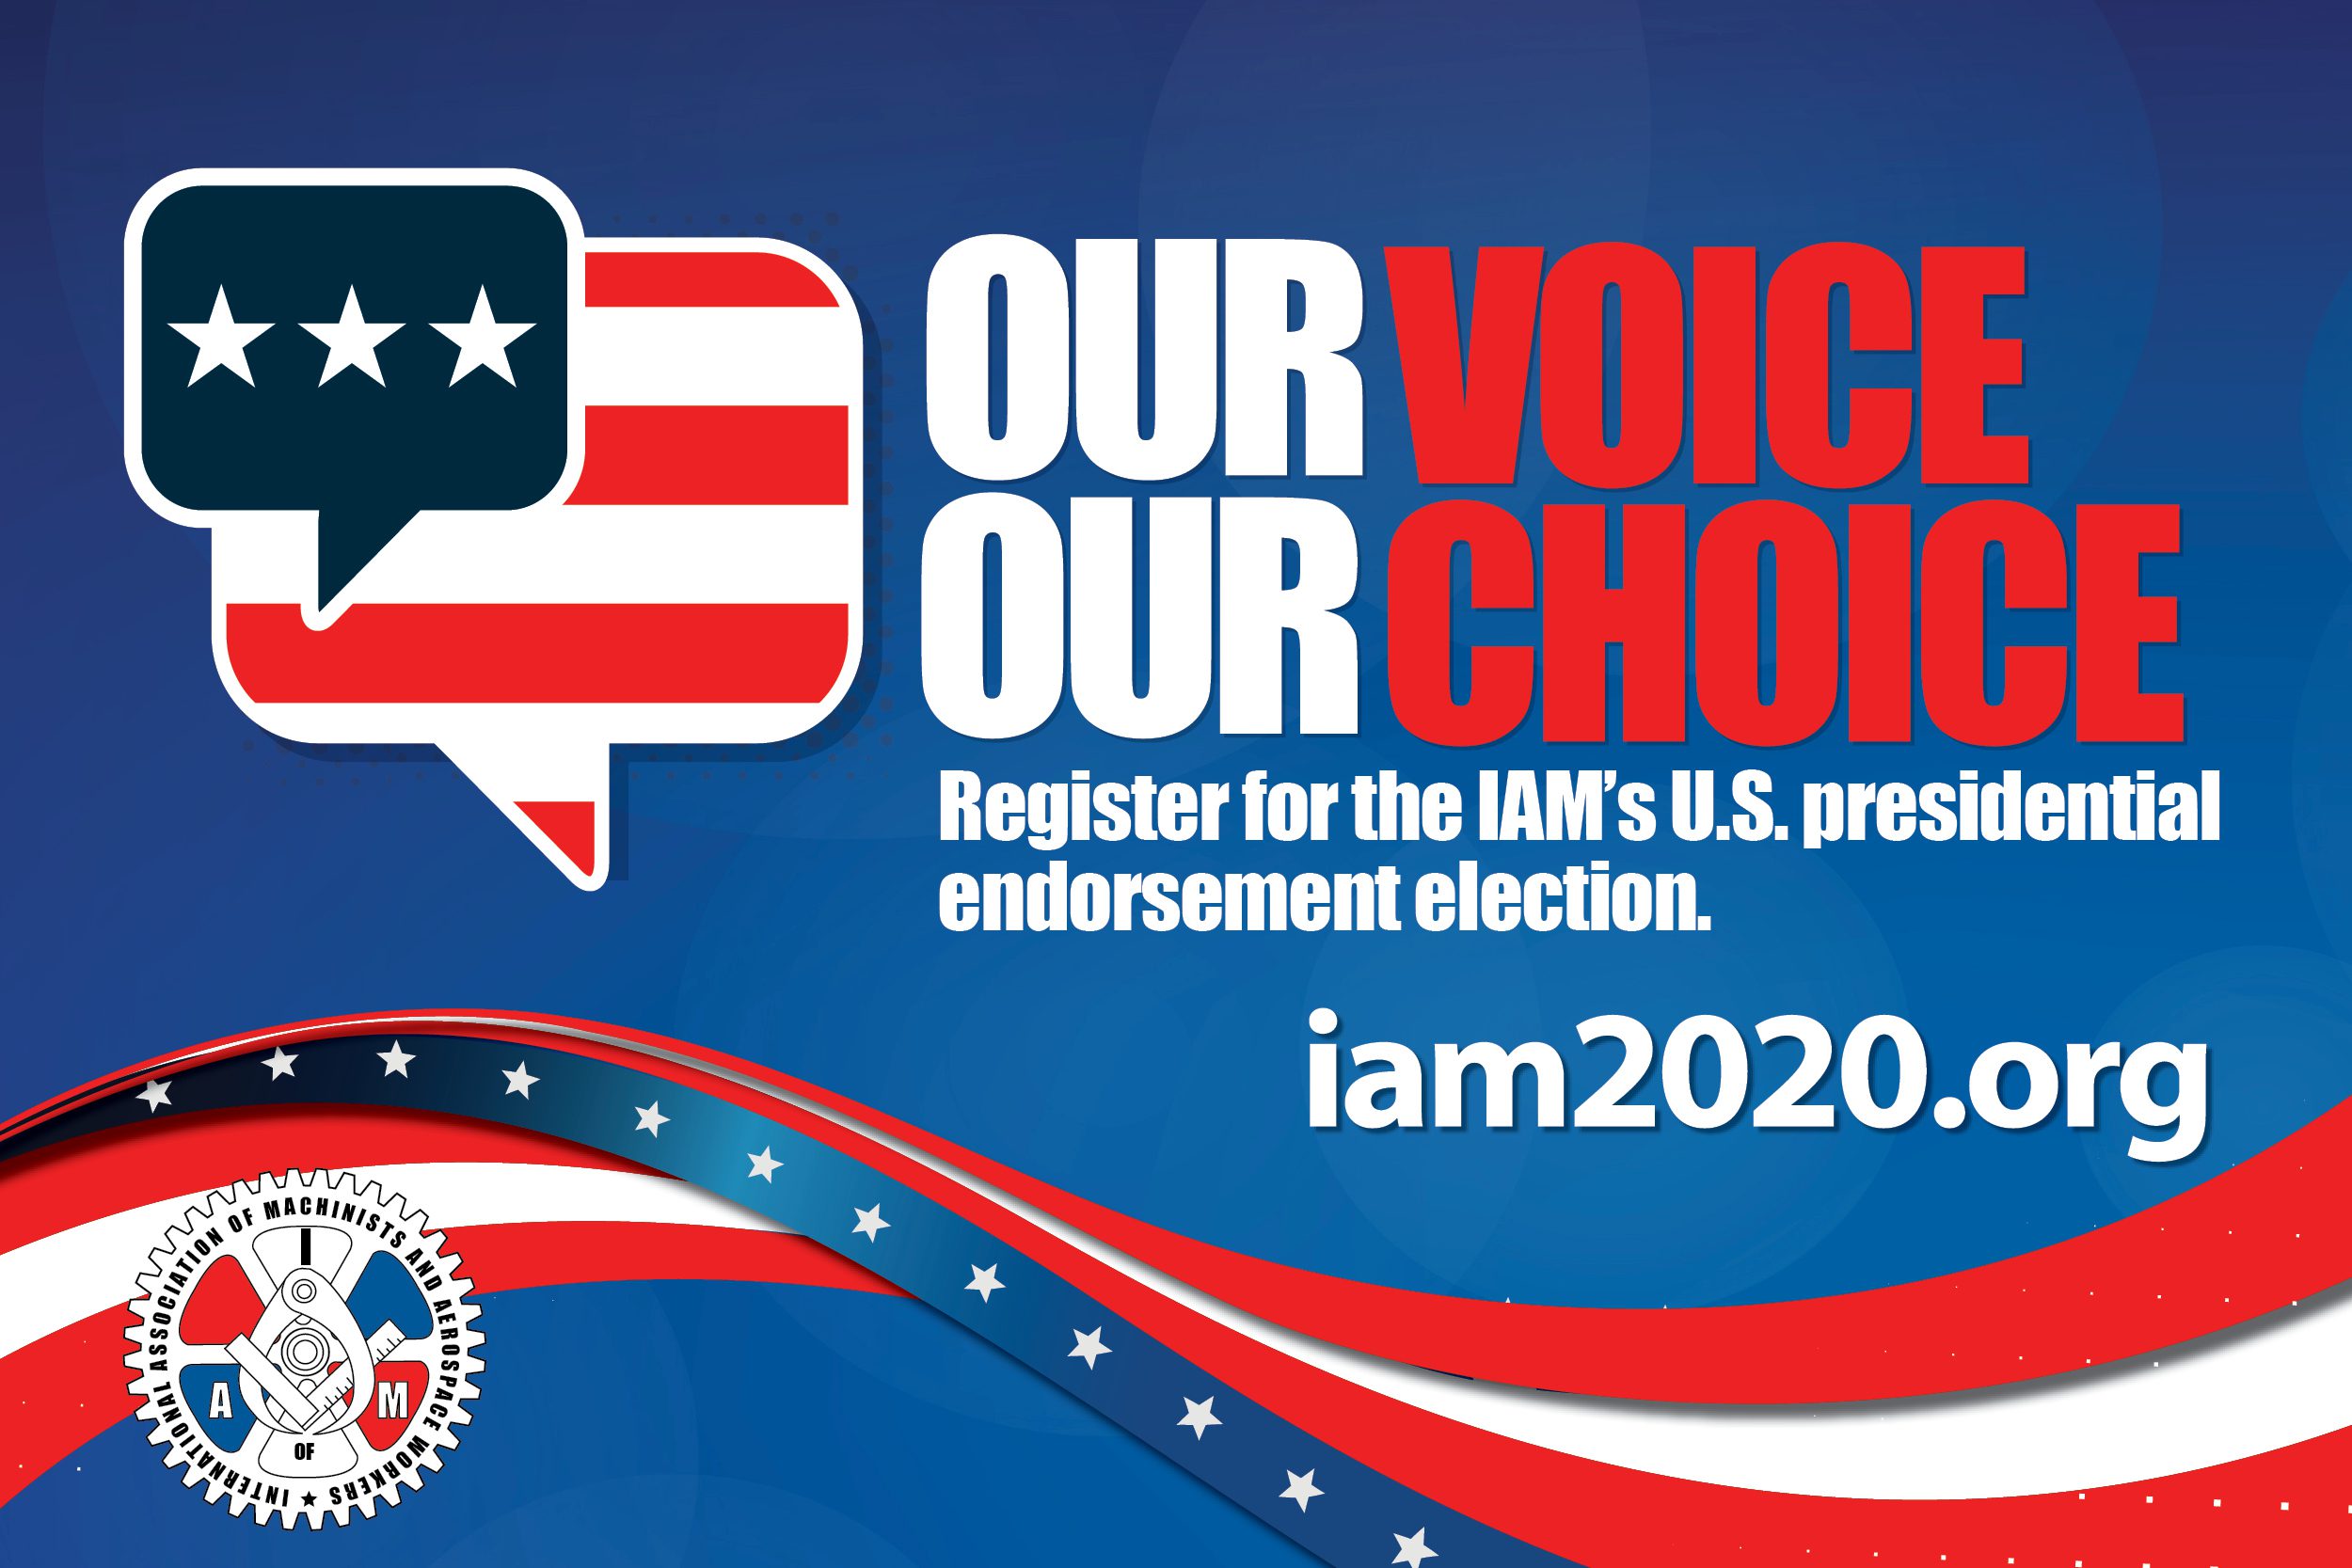 Have You Registered for the IAM’s 2020 Presidential Endorsement Election?